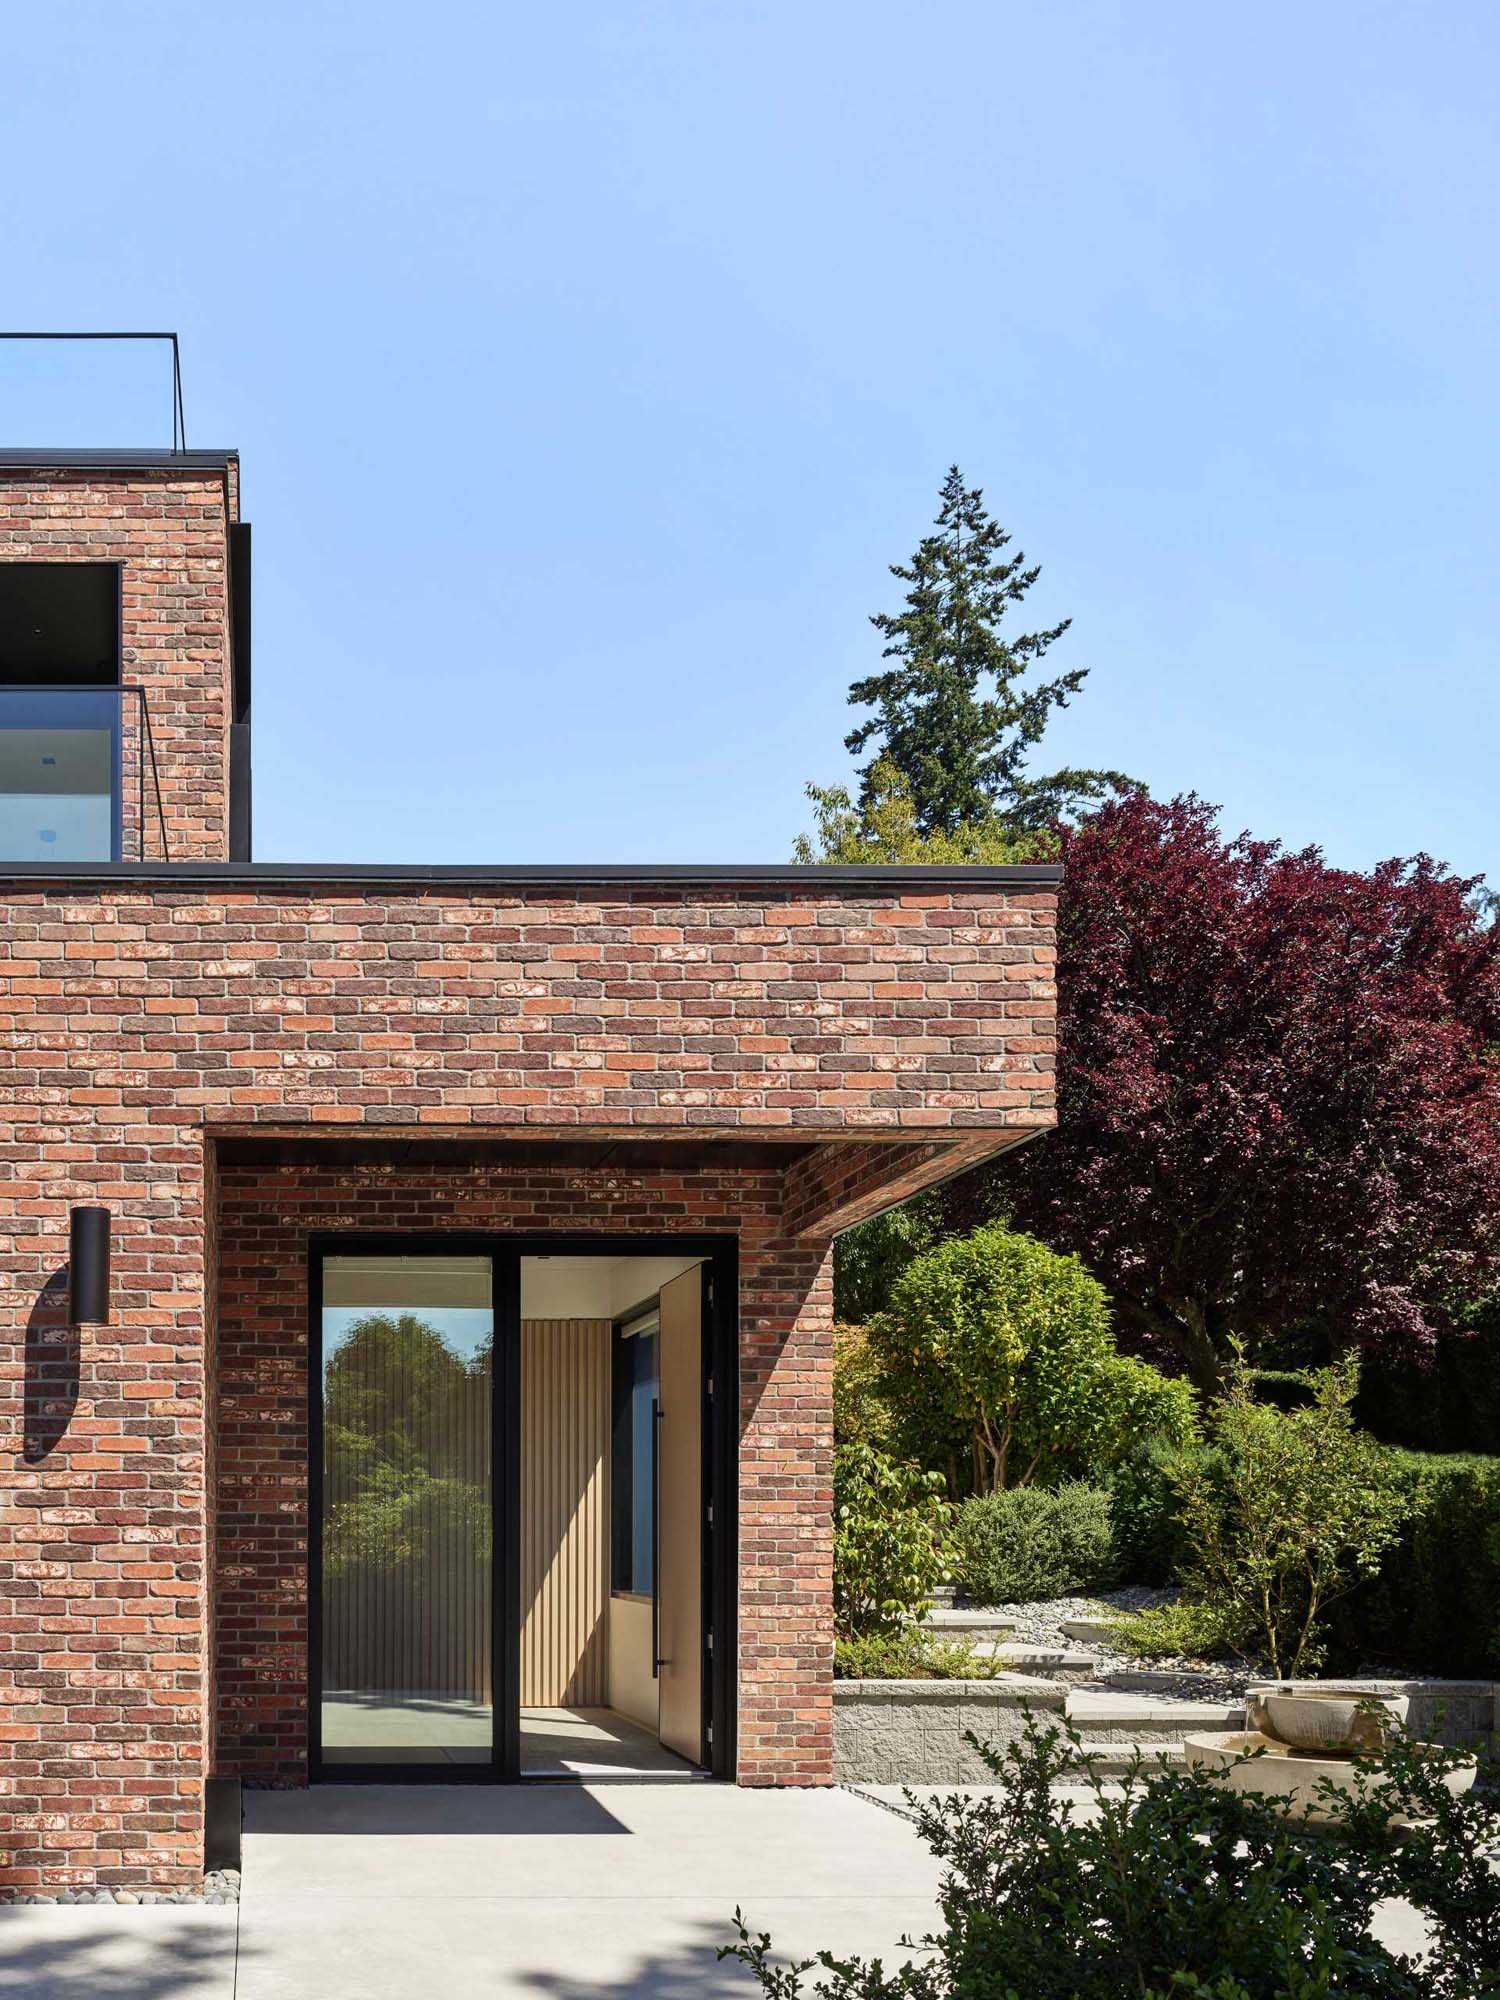 A modern brick house with black window and door frames.